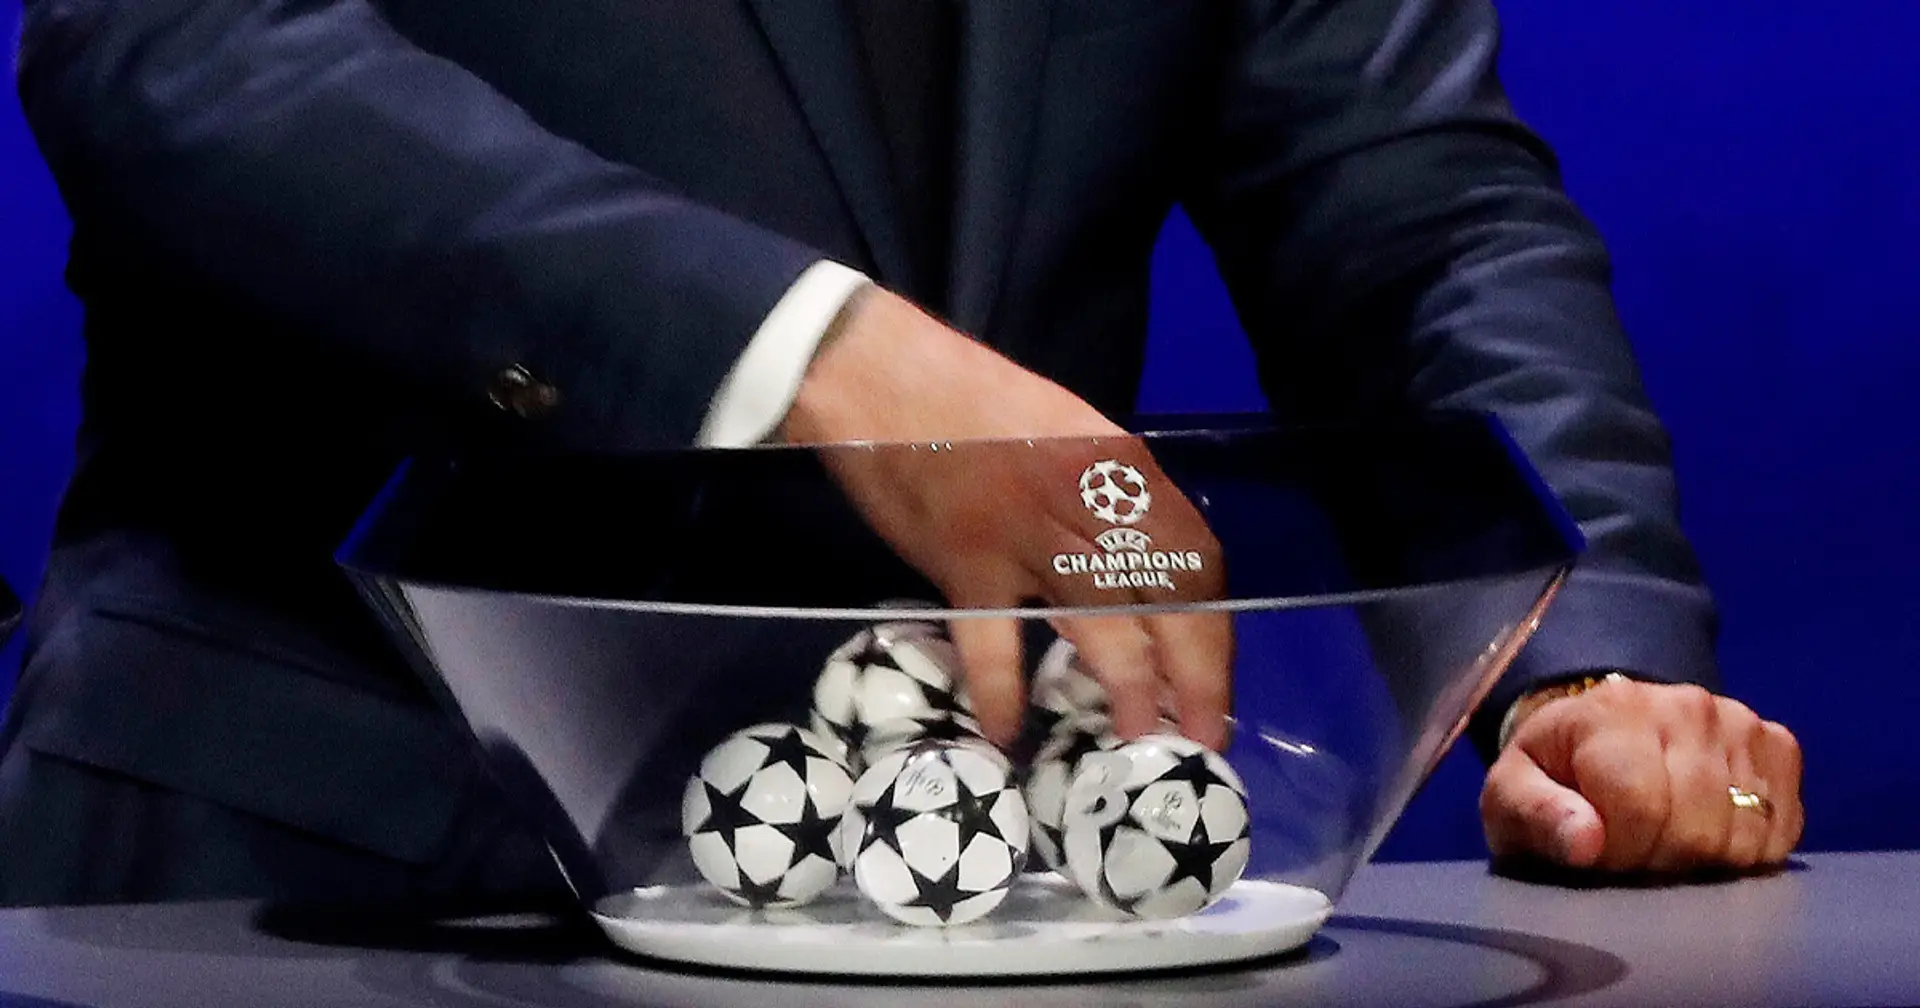 Champions League quarterfinal draw completed - full results